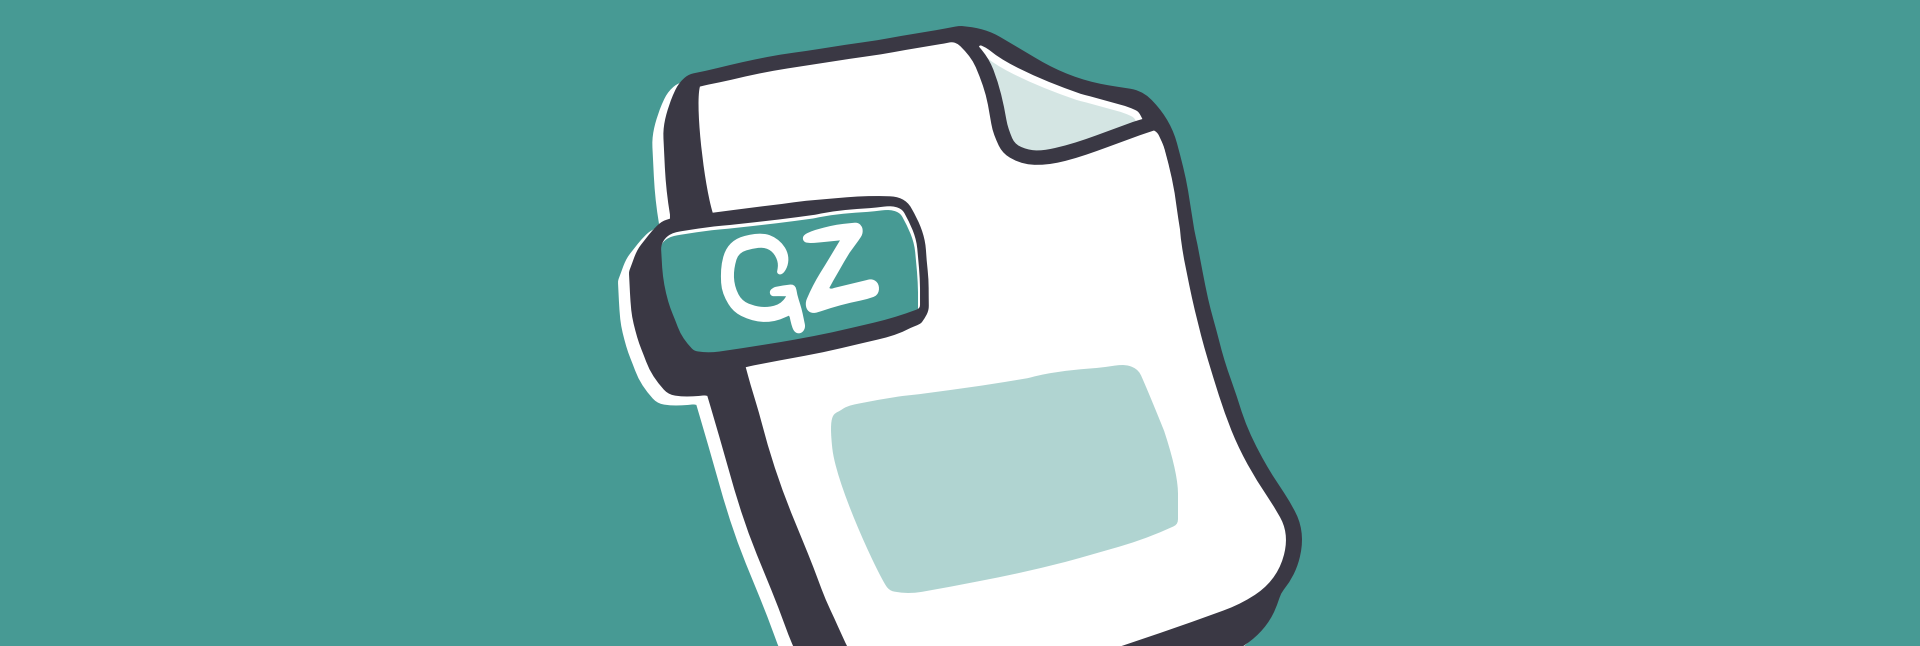 how to unzip 7z file on mac